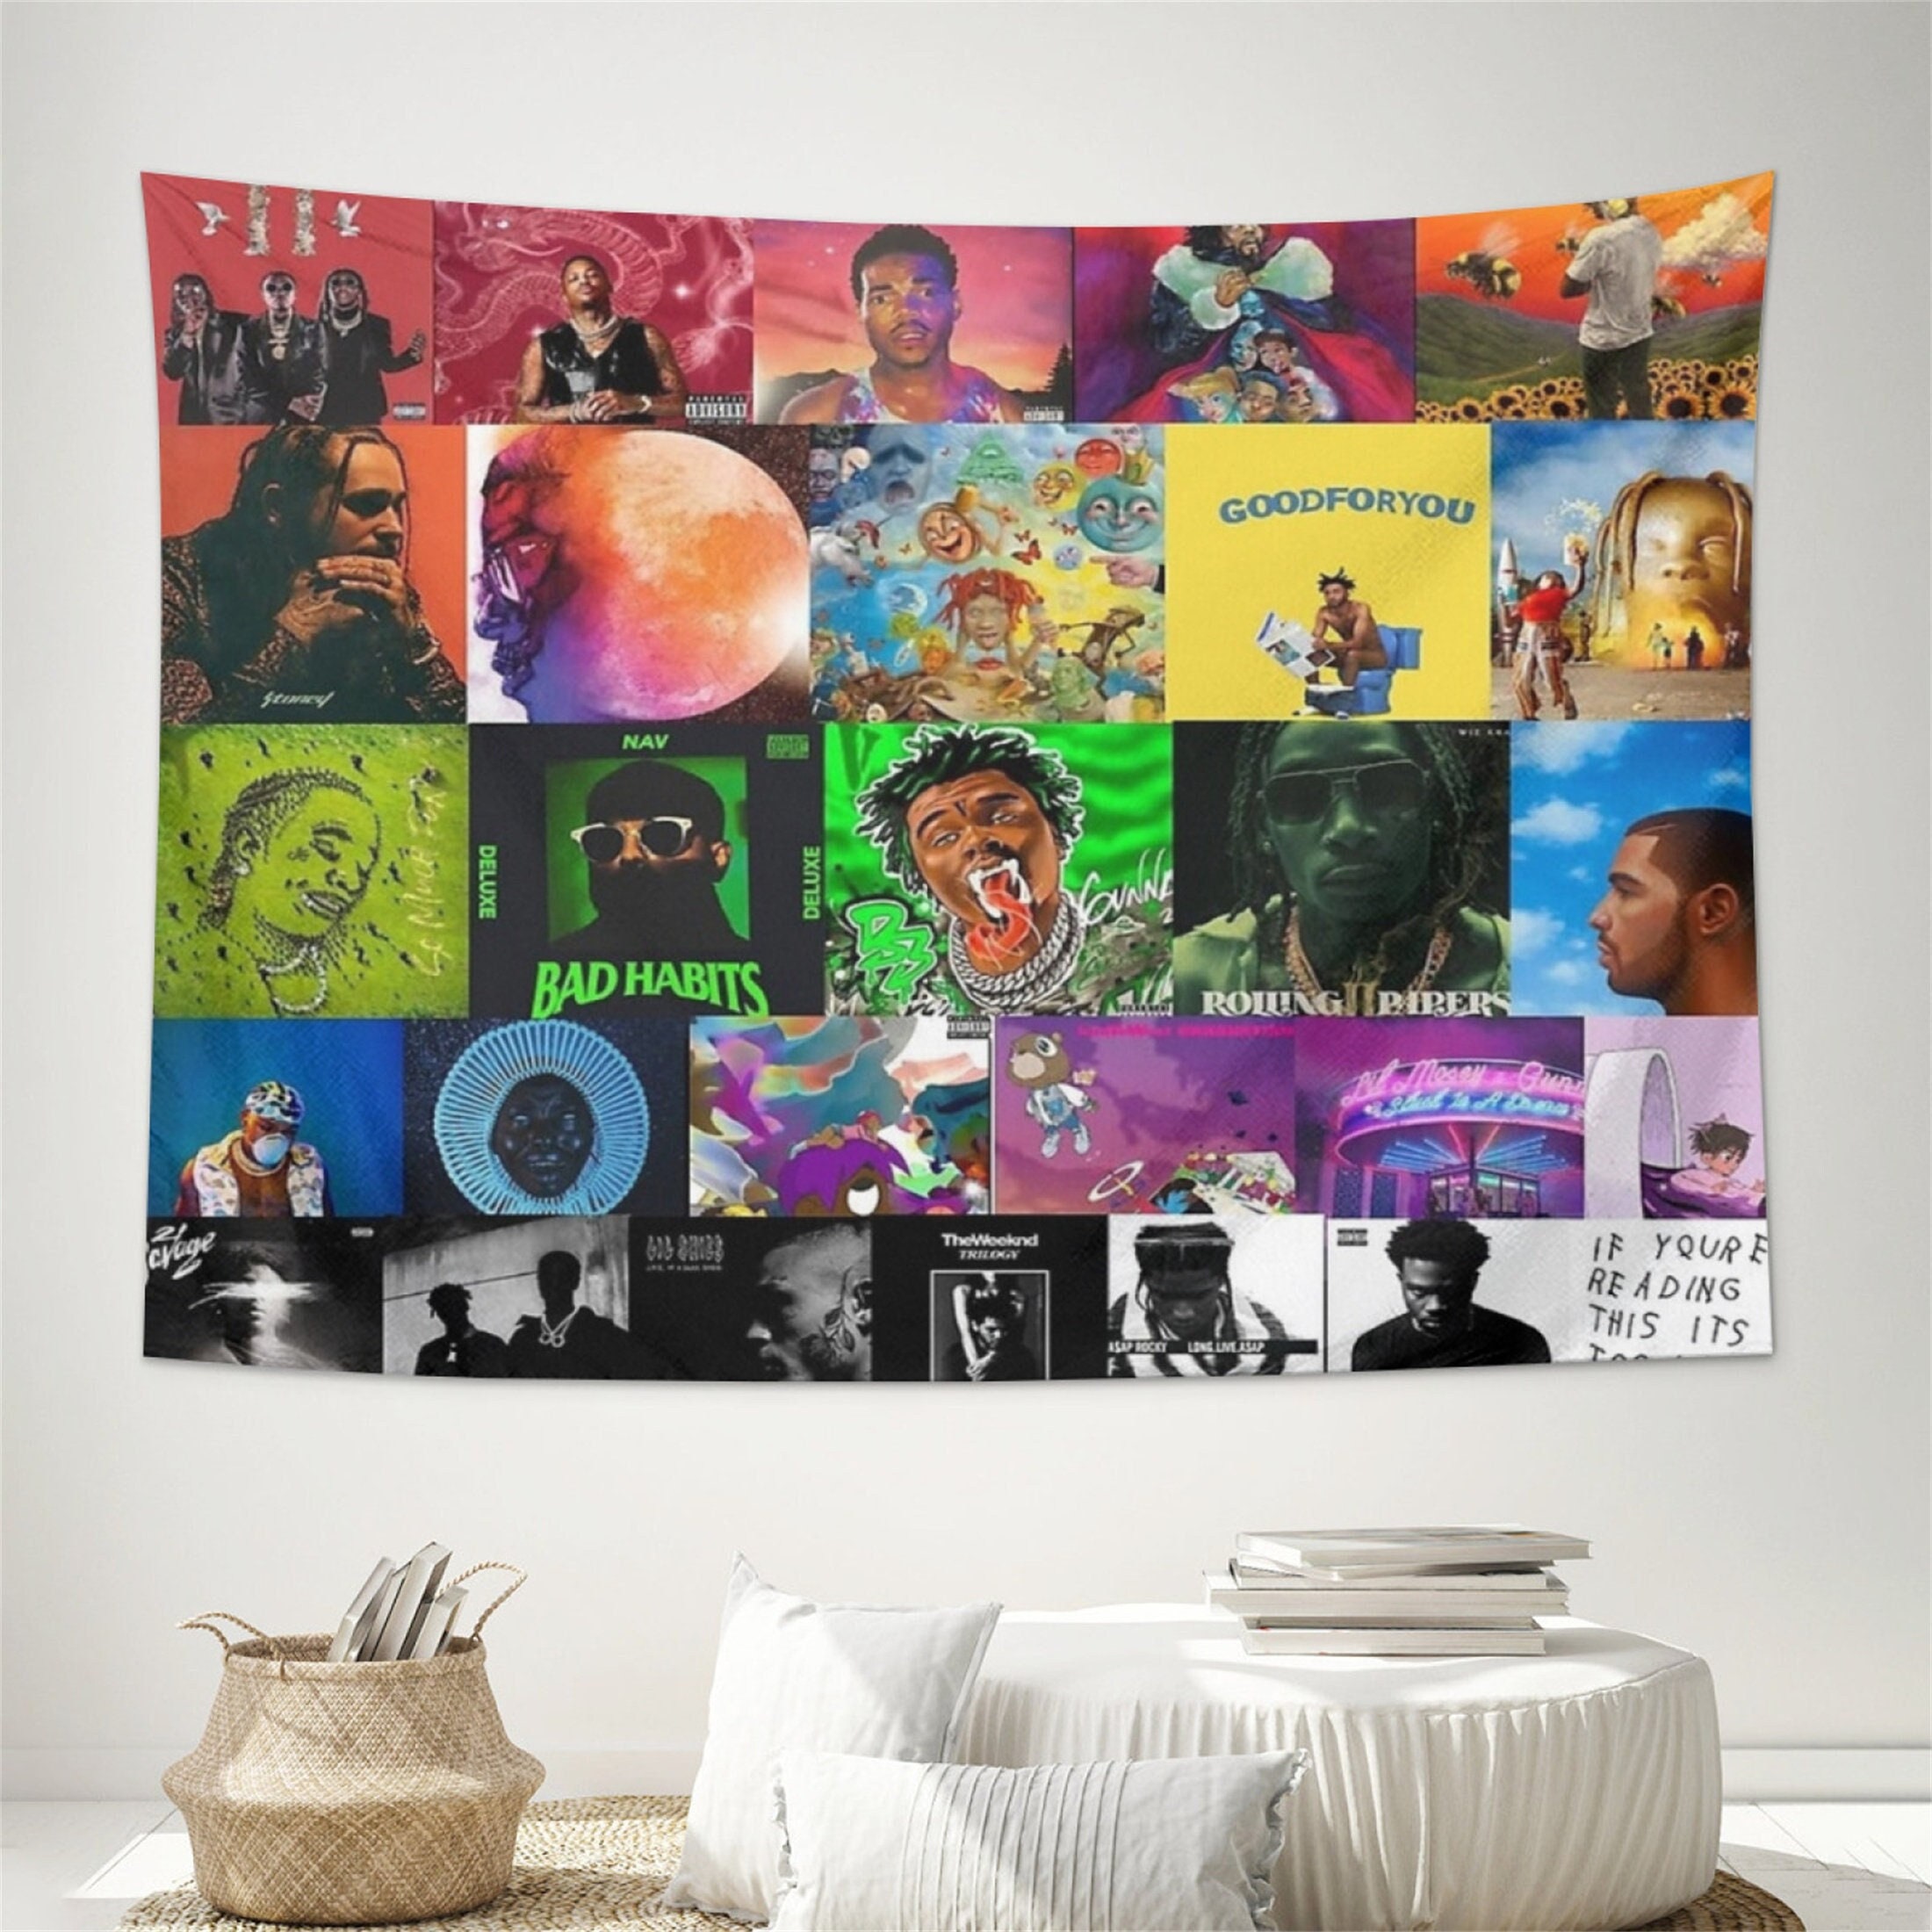 CMIYGL ART BY ME @yoboiediz  Bedroom wall collage, Photo wall collage,  Tyler the creator